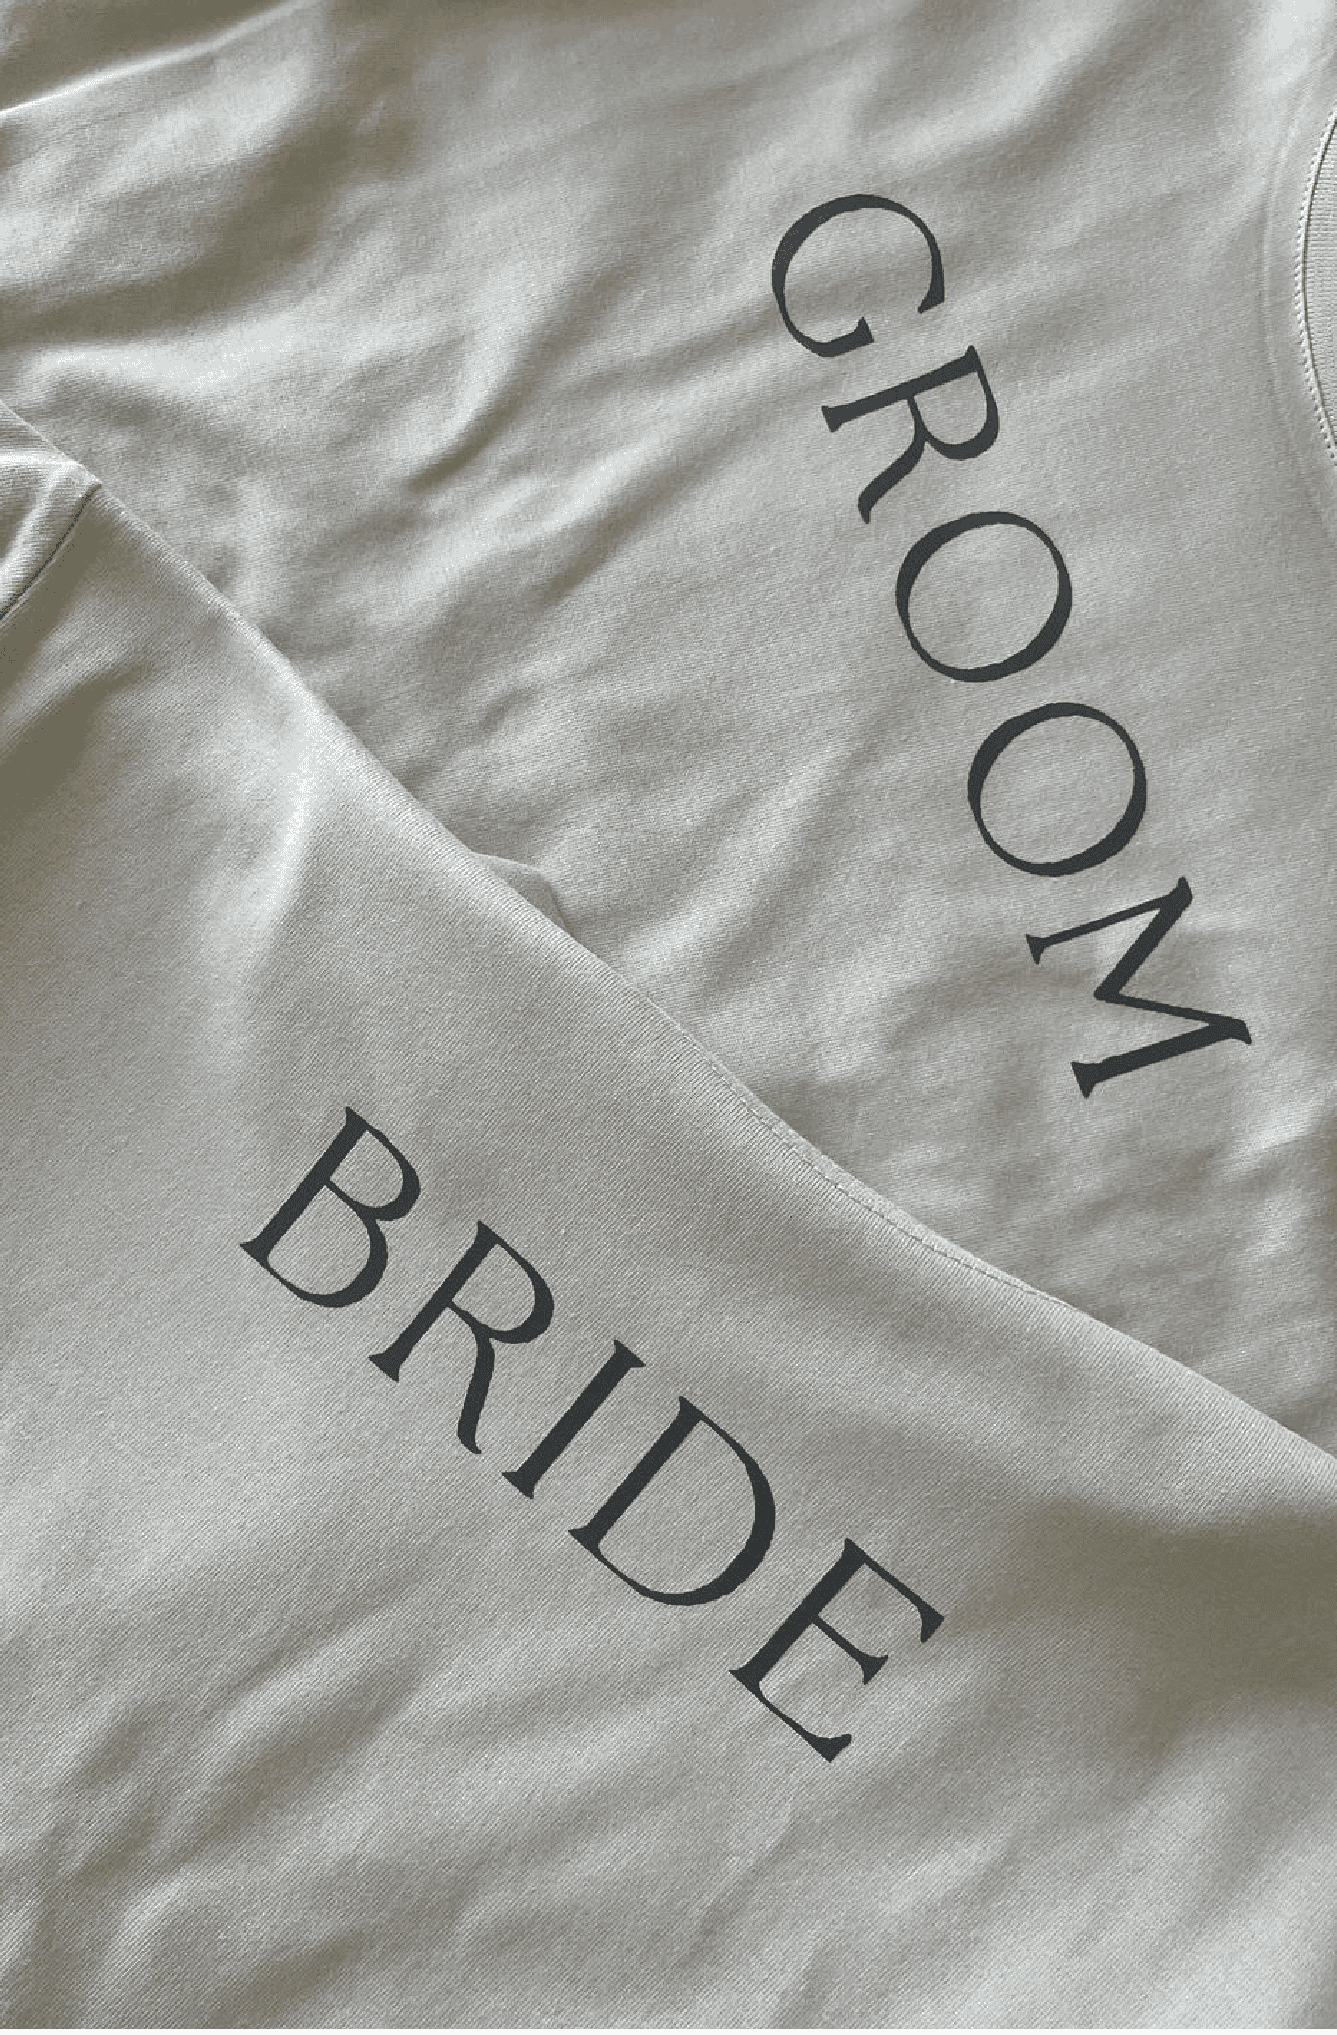 Bride and Groom t-shirts in a Khaki or Beige colour